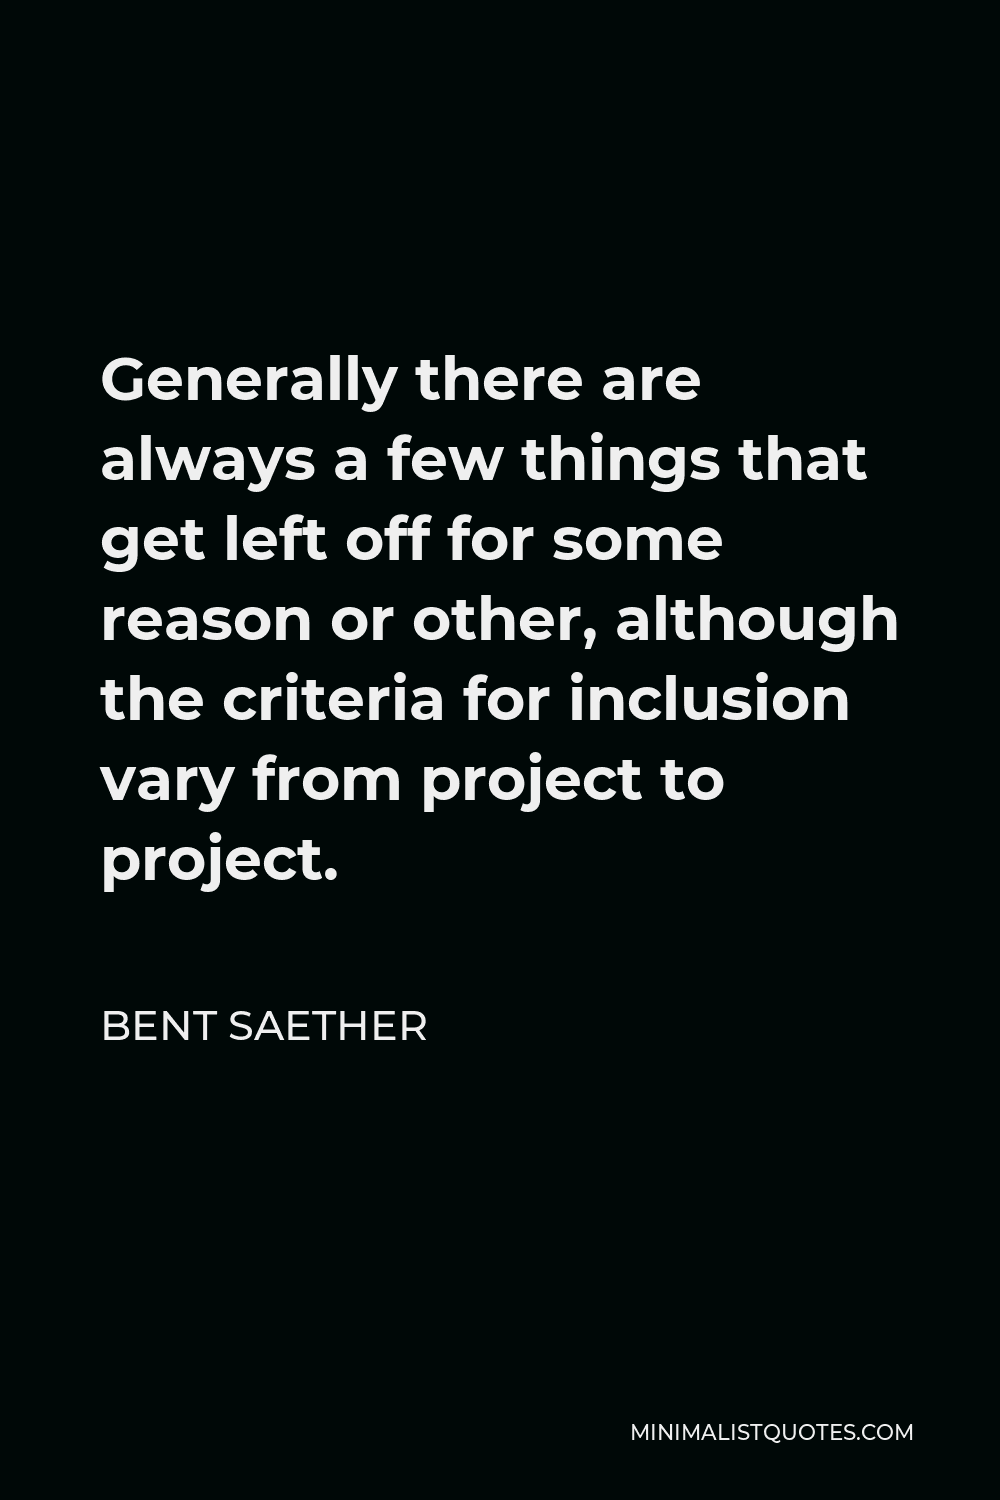 Bent Saether Quote - Generally there are always a few things that get left off for some reason or other, although the criteria for inclusion vary from project to project.